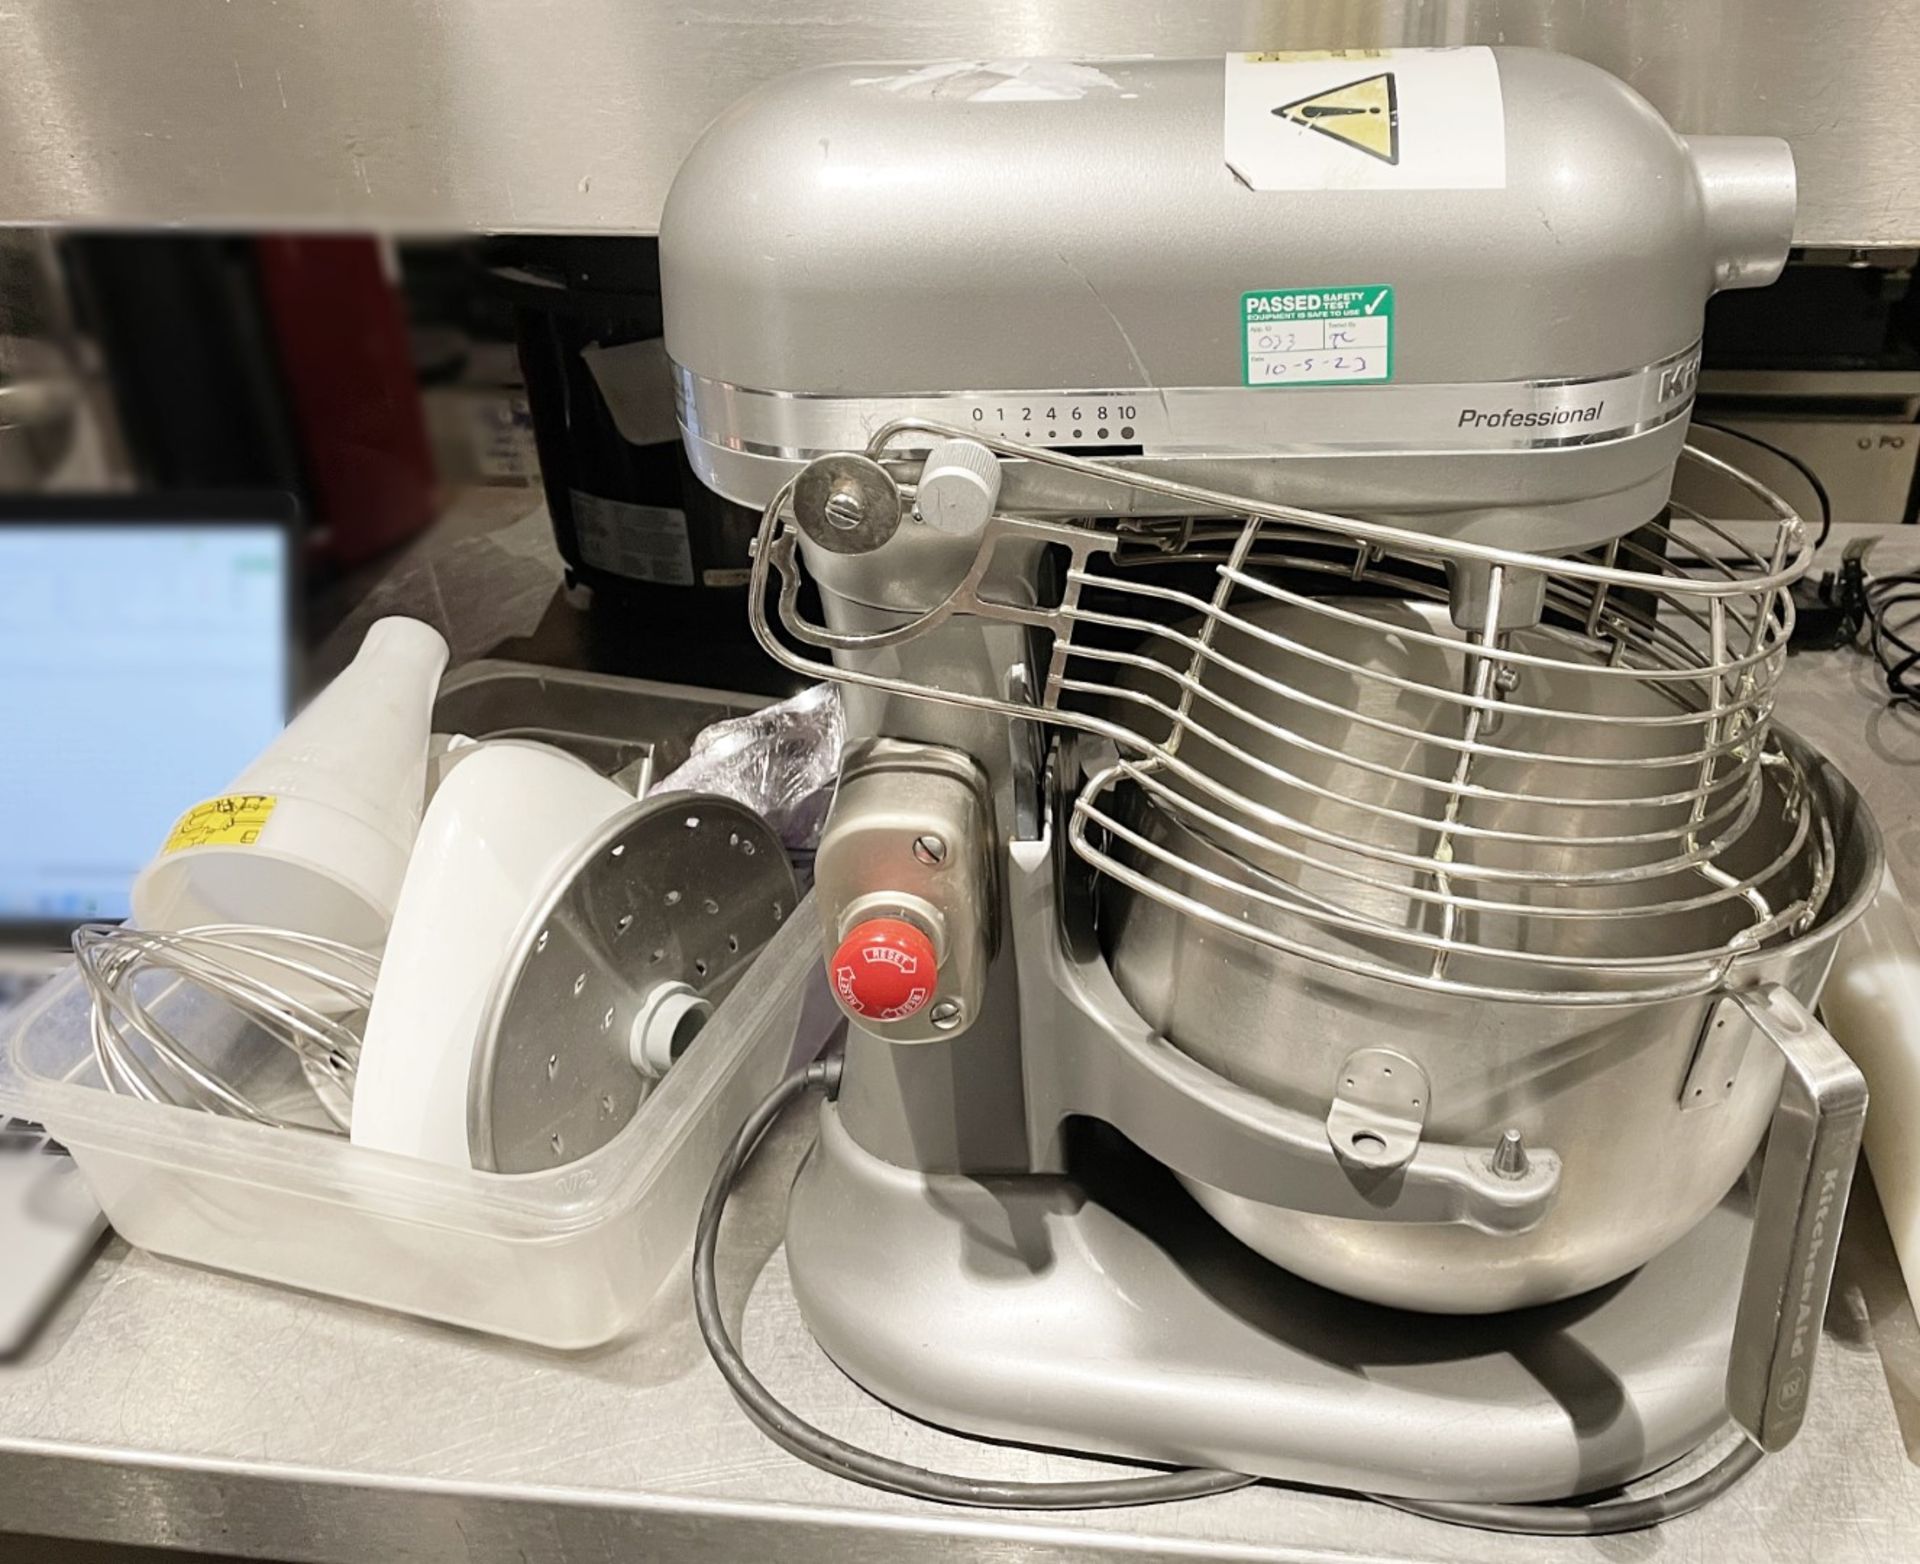 1 x Kitchenaid 6.9 Ltr Commercial Planetary Food Mixer - Model 5KSM7990XBSL - Includes Mixing Bowl - Image 15 of 16